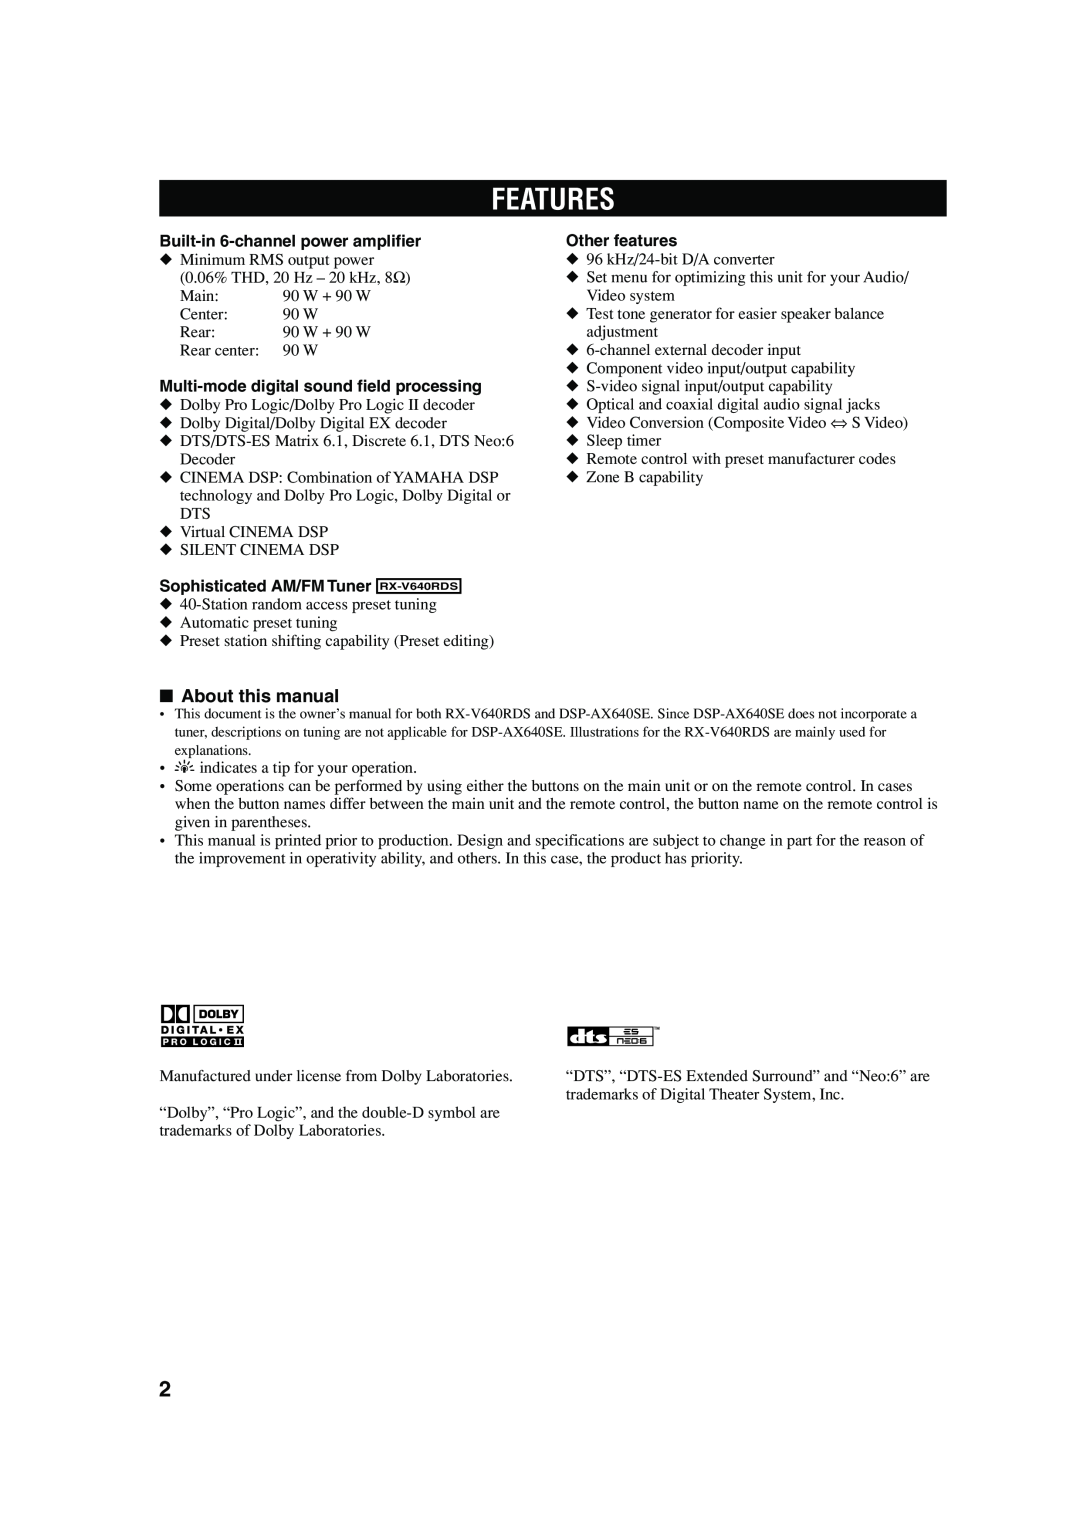 Yamaha RX-V640RDS owner manual Features, About this manual 